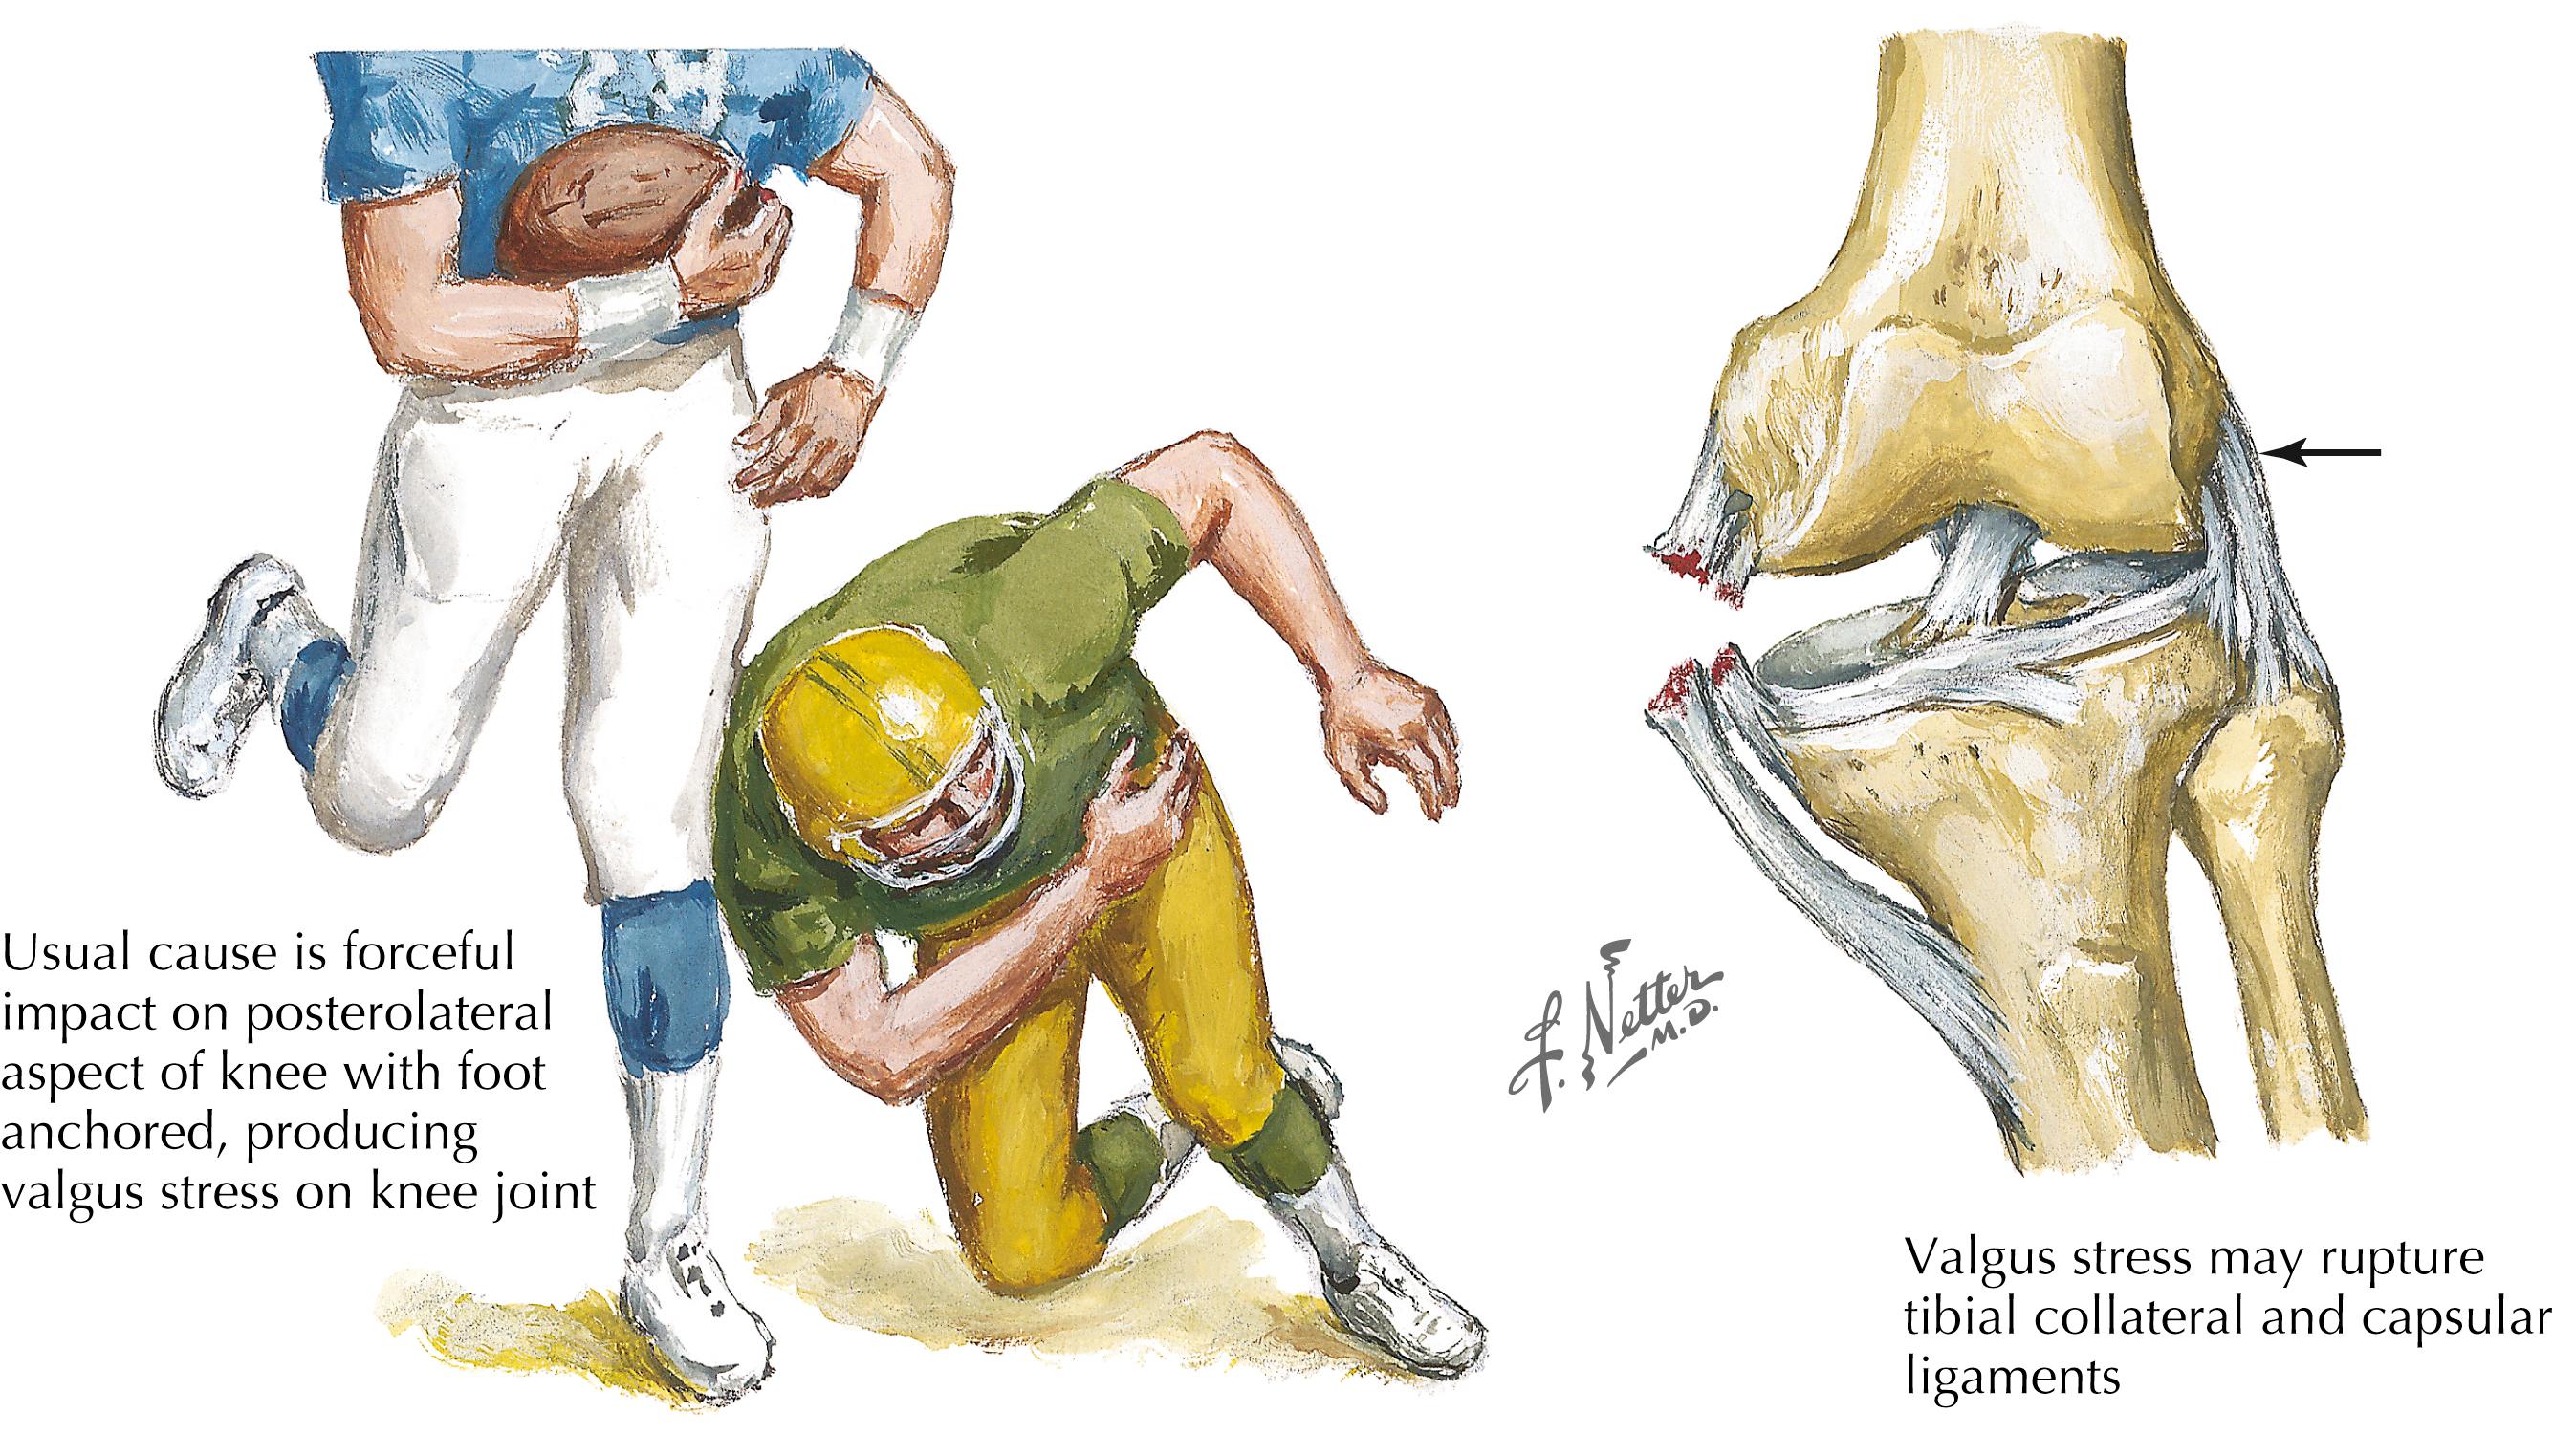 Figure 7-14, Medial collateral ligament rupture.